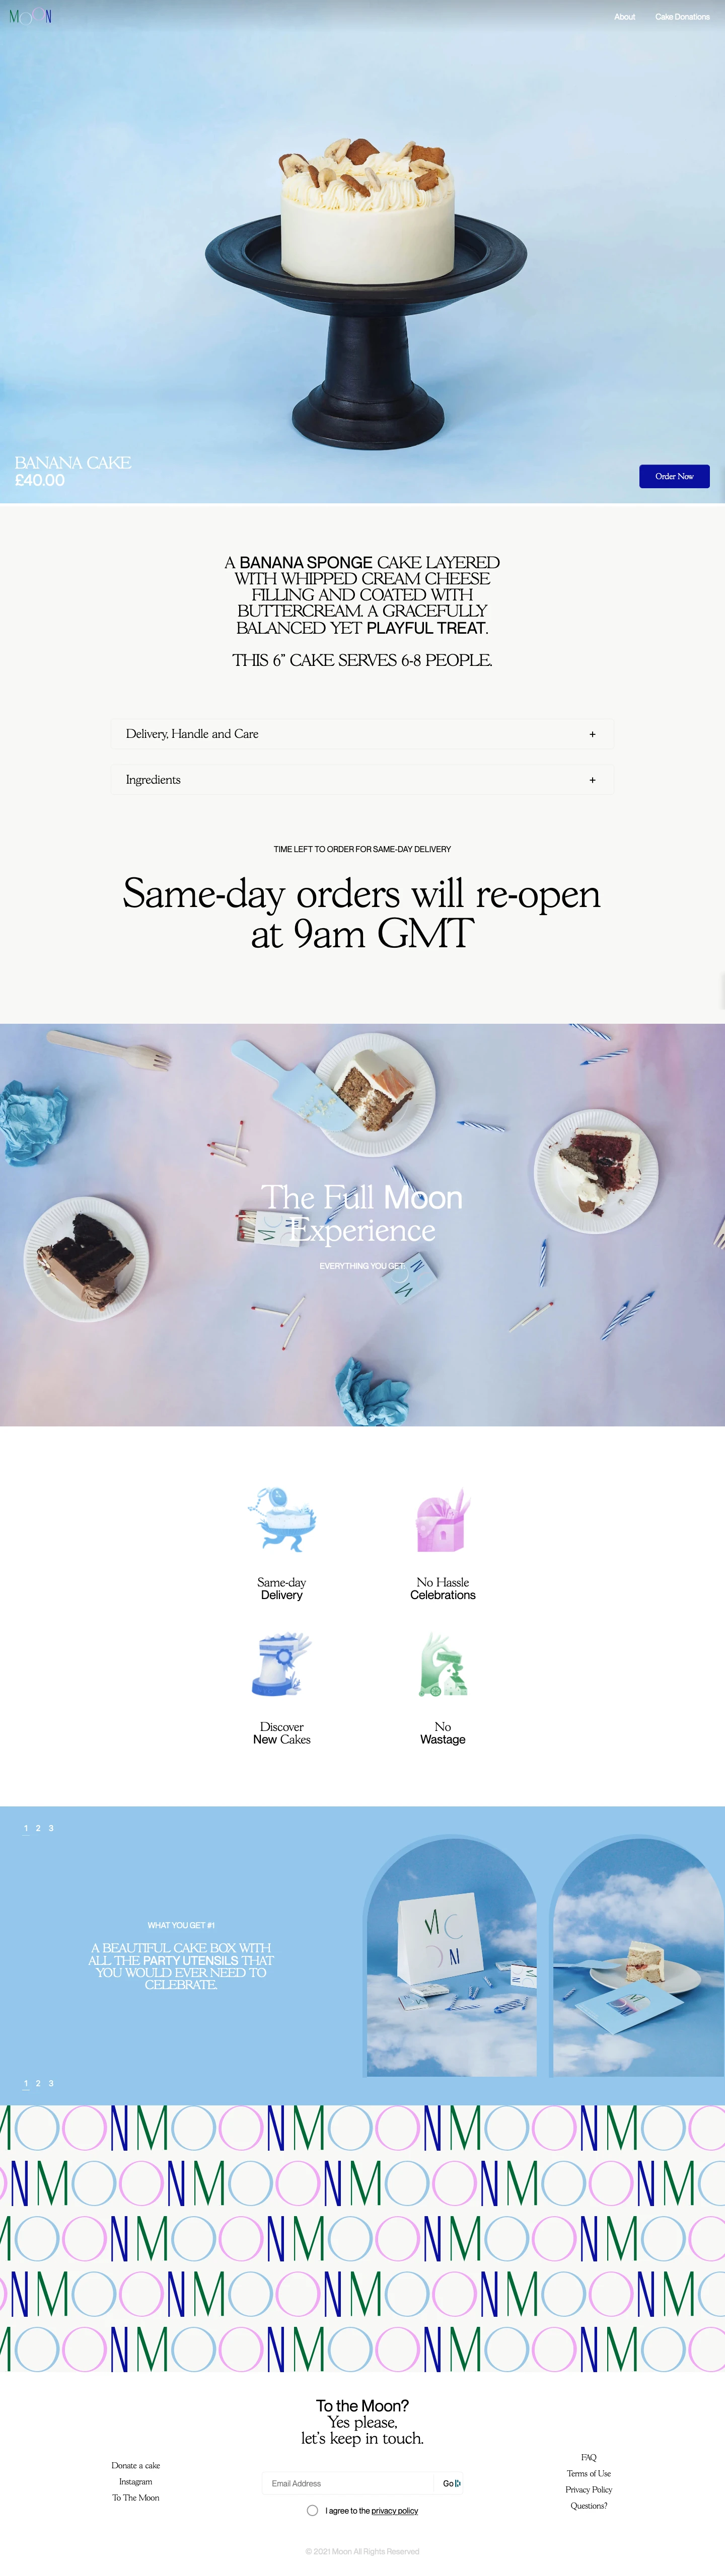 Moon Delivers Cakes Landing Page Example: Hey you! Welcome to Moon. We deliver the best cakes in London, same day. We pack every cake with all necessary utensils so you can enjoy every moment of your celebration, hassle free. Enjoy!